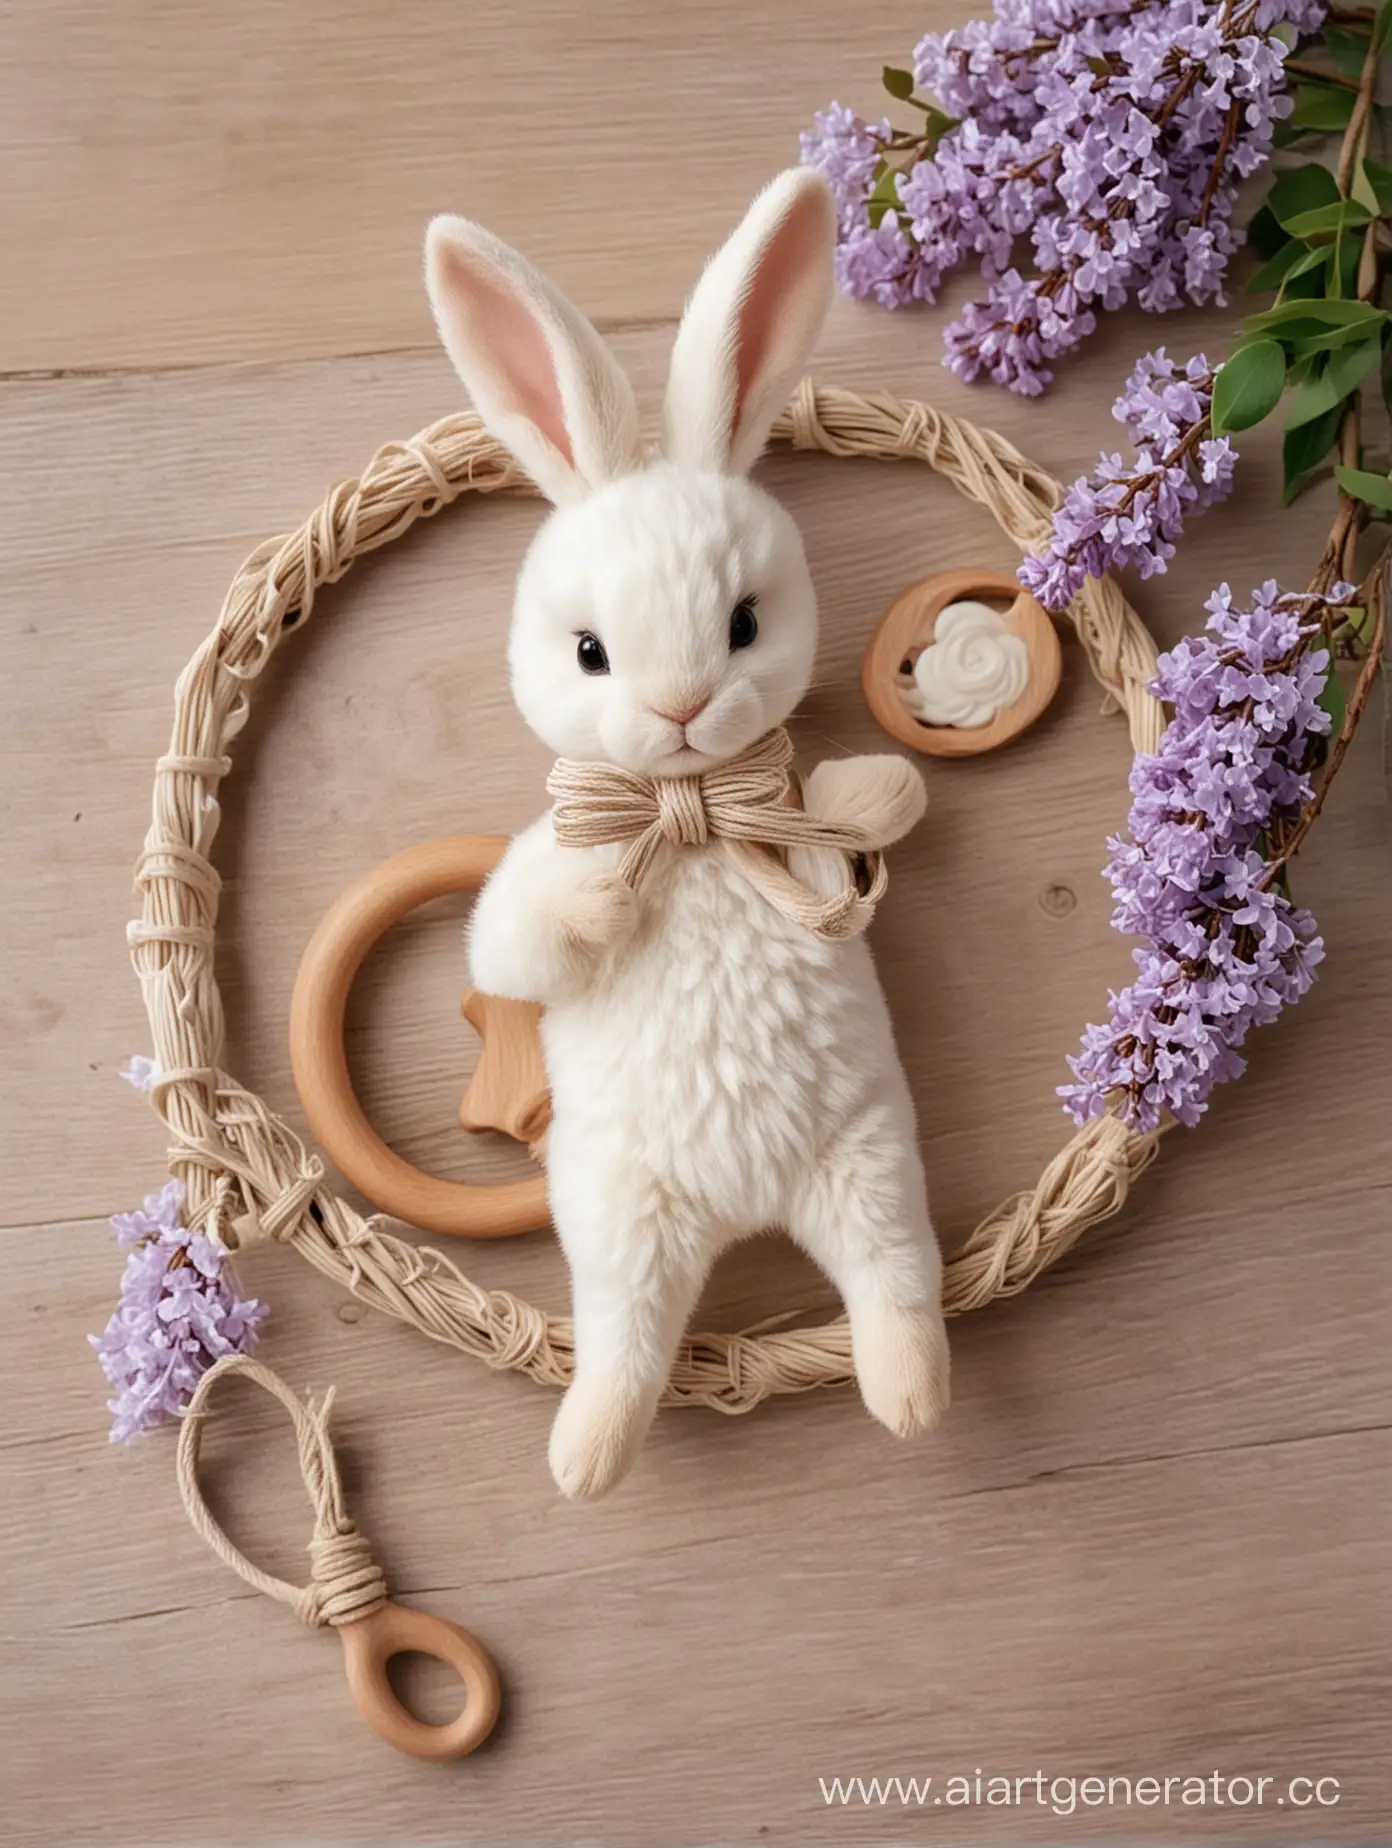 Milky-Hooked-Rattle-Bunny-on-Decorated-Table-with-Lilac-Flowers-and-Wooden-Accents